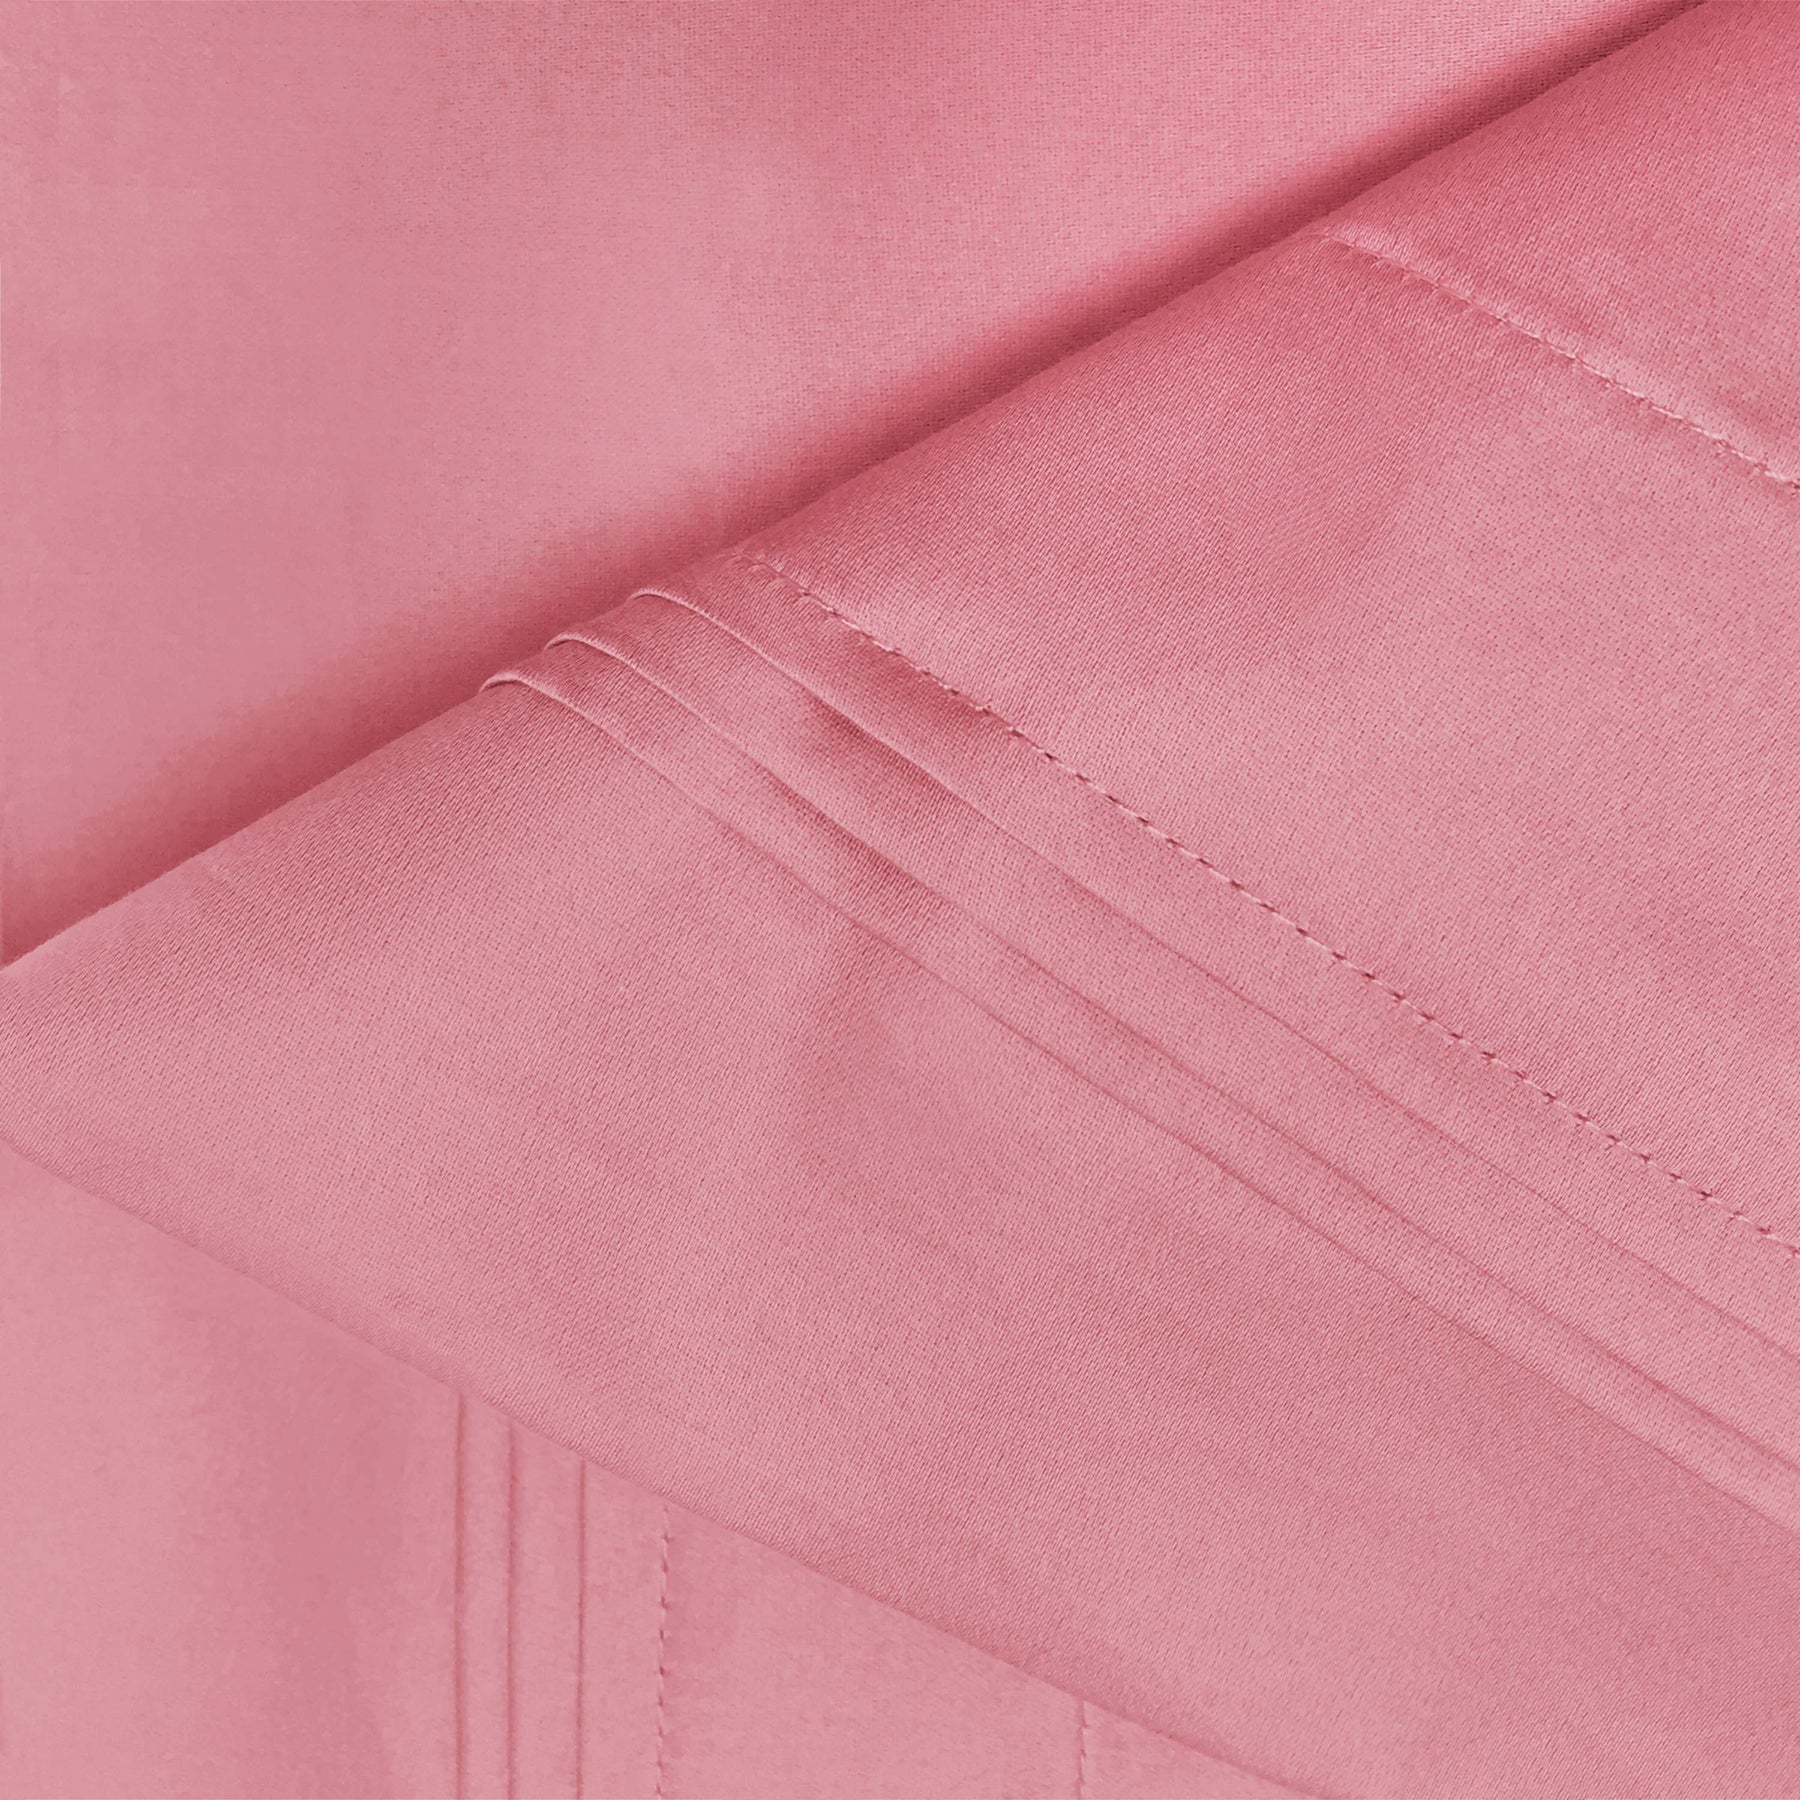 Egyptian Cotton 650 Thread Count Eco-Friendly Solid Sheet Set - Blush